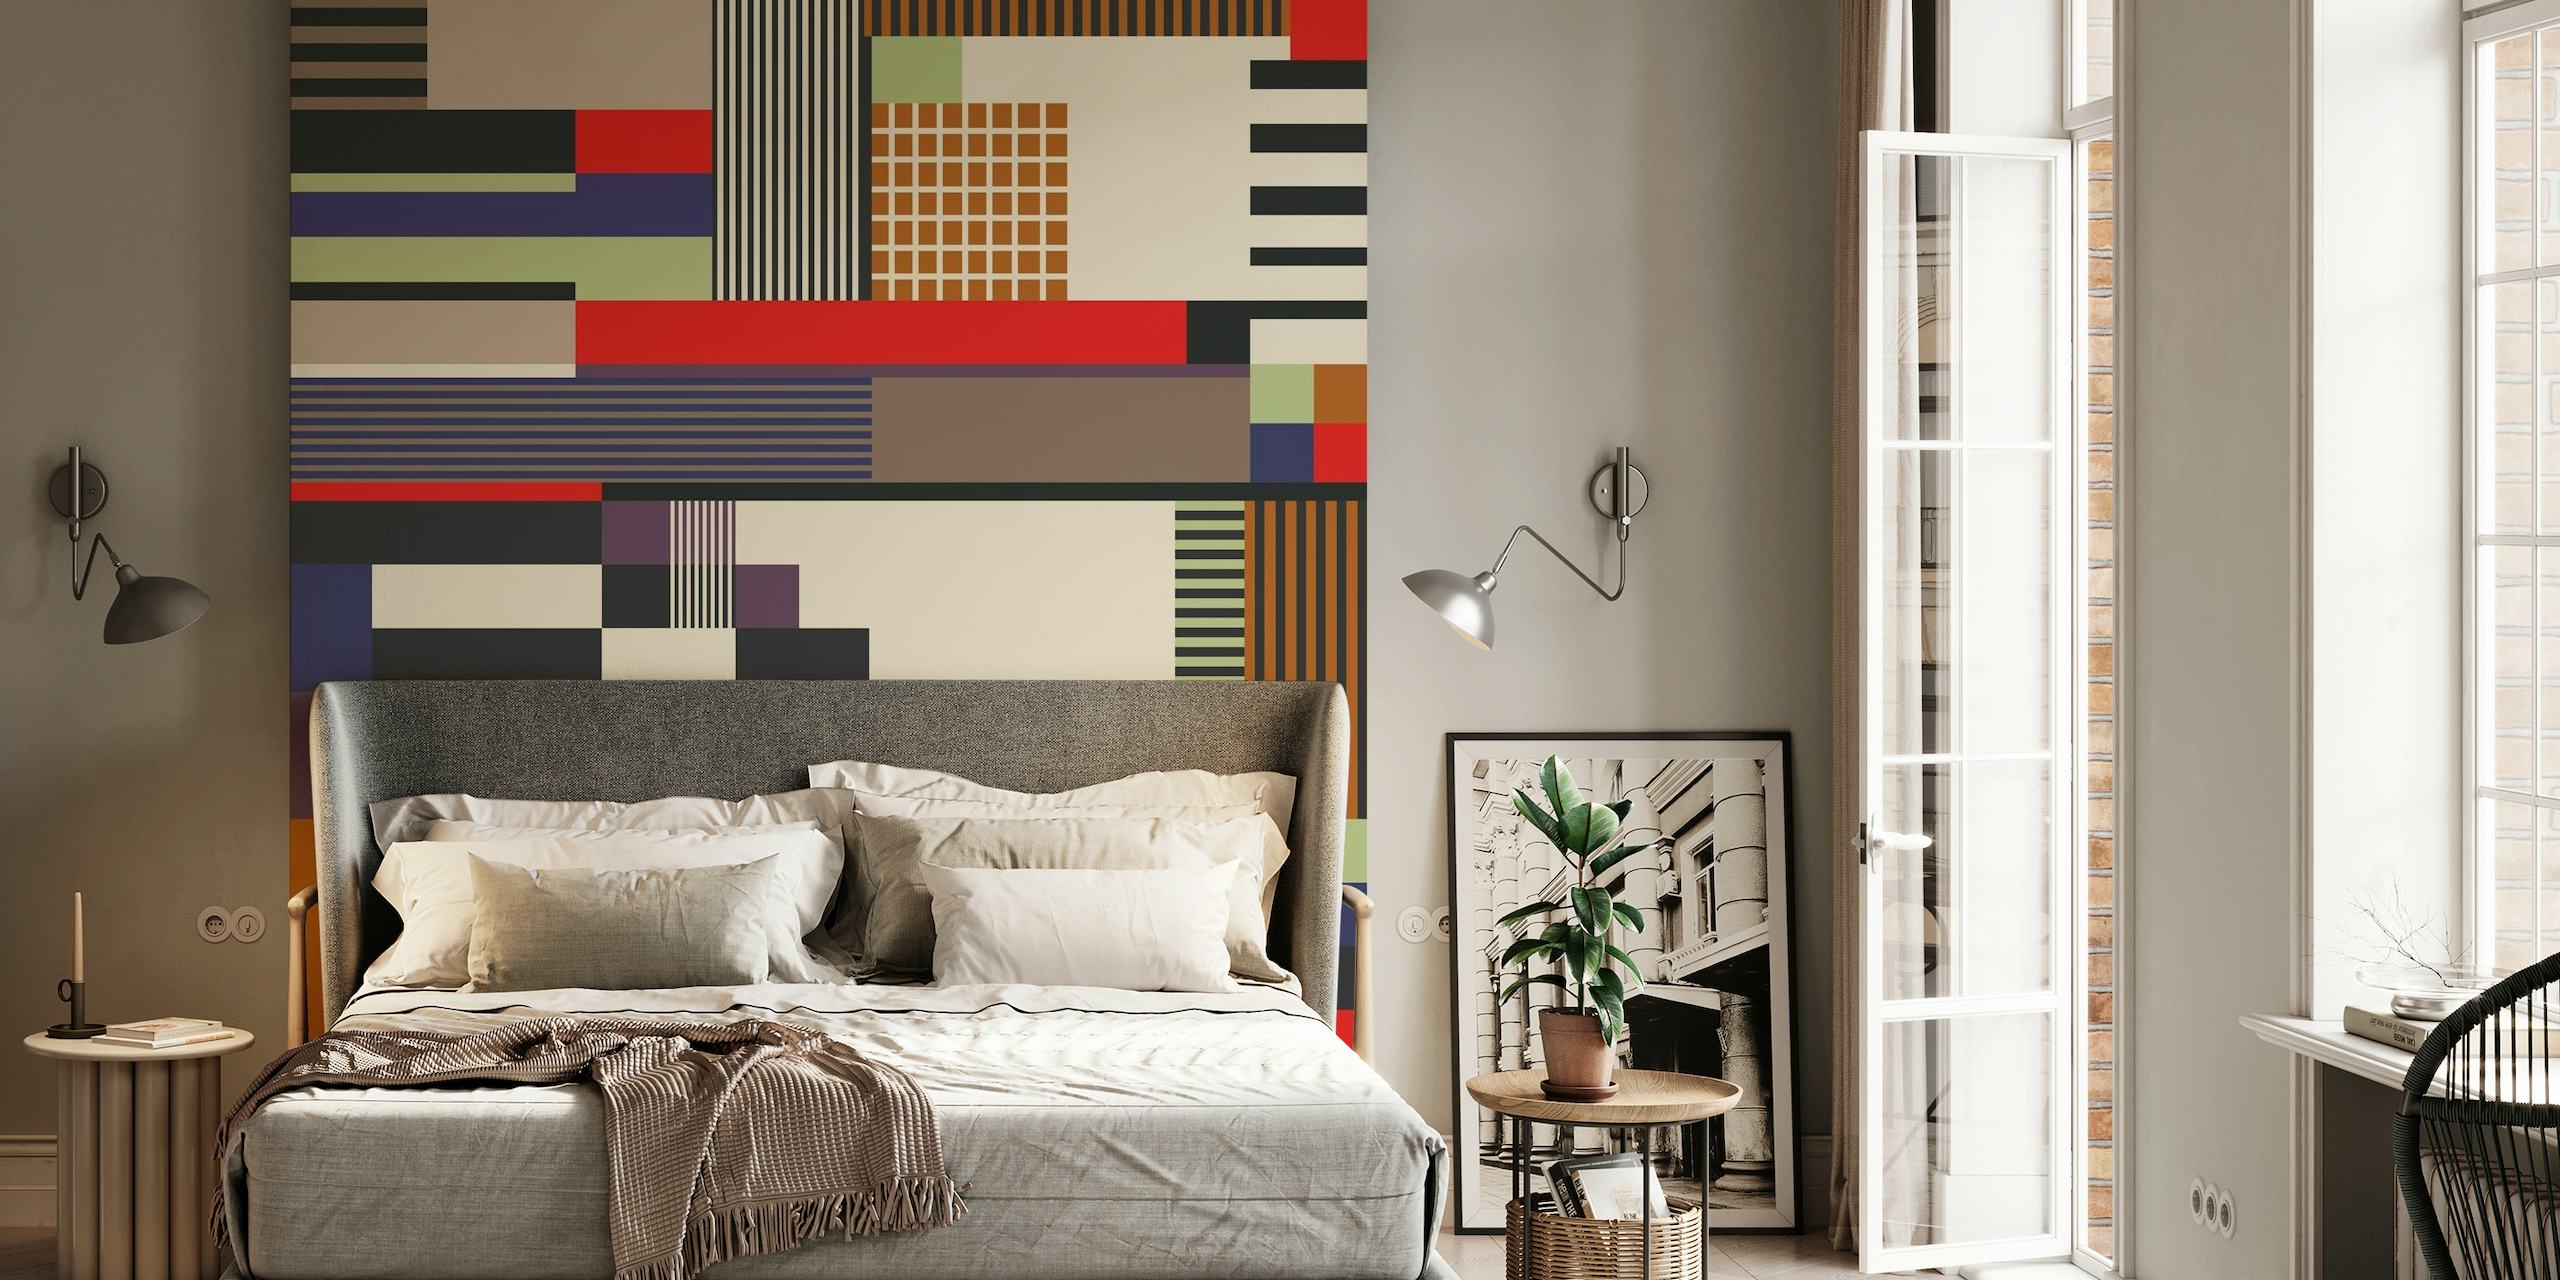 Abstract geometric pattern wall mural with a mix of rectangles and lines in various colors